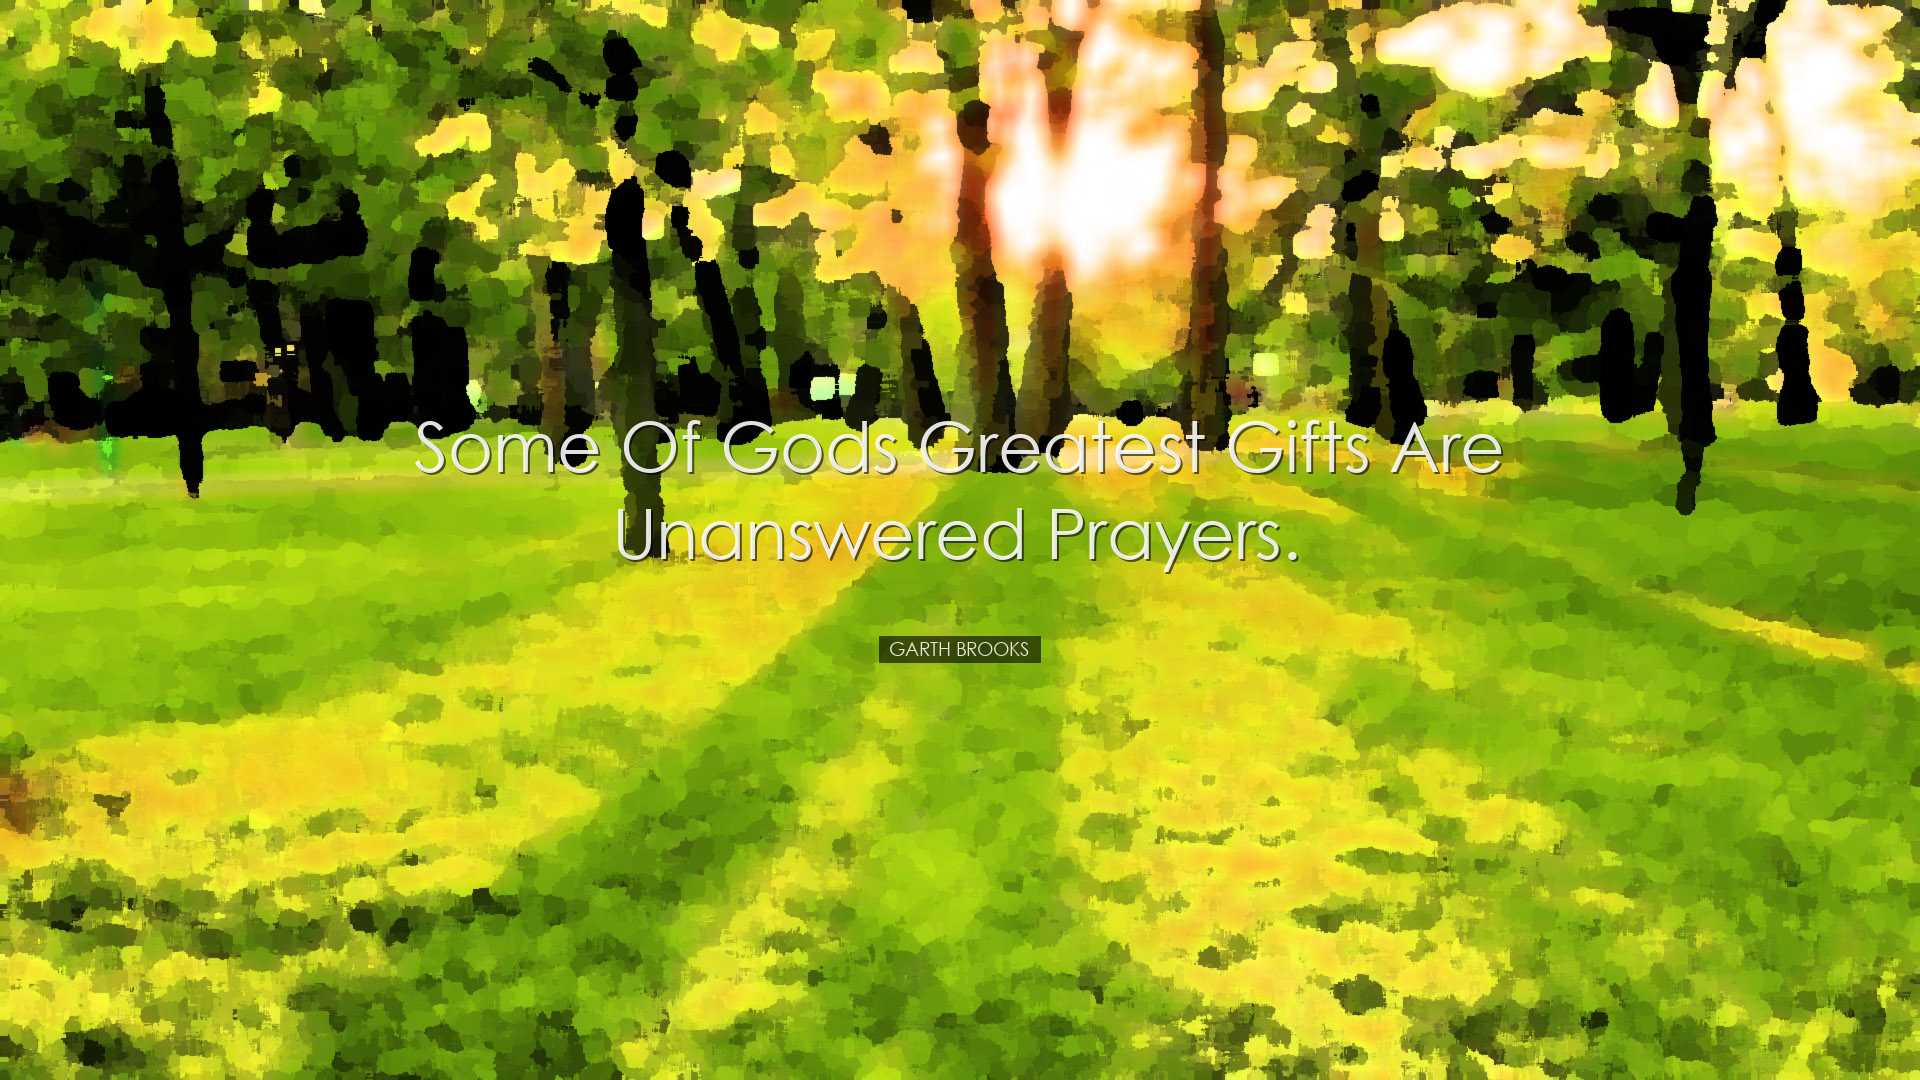 Some of Gods greatest gifts are unanswered prayers. - Garth Brooks